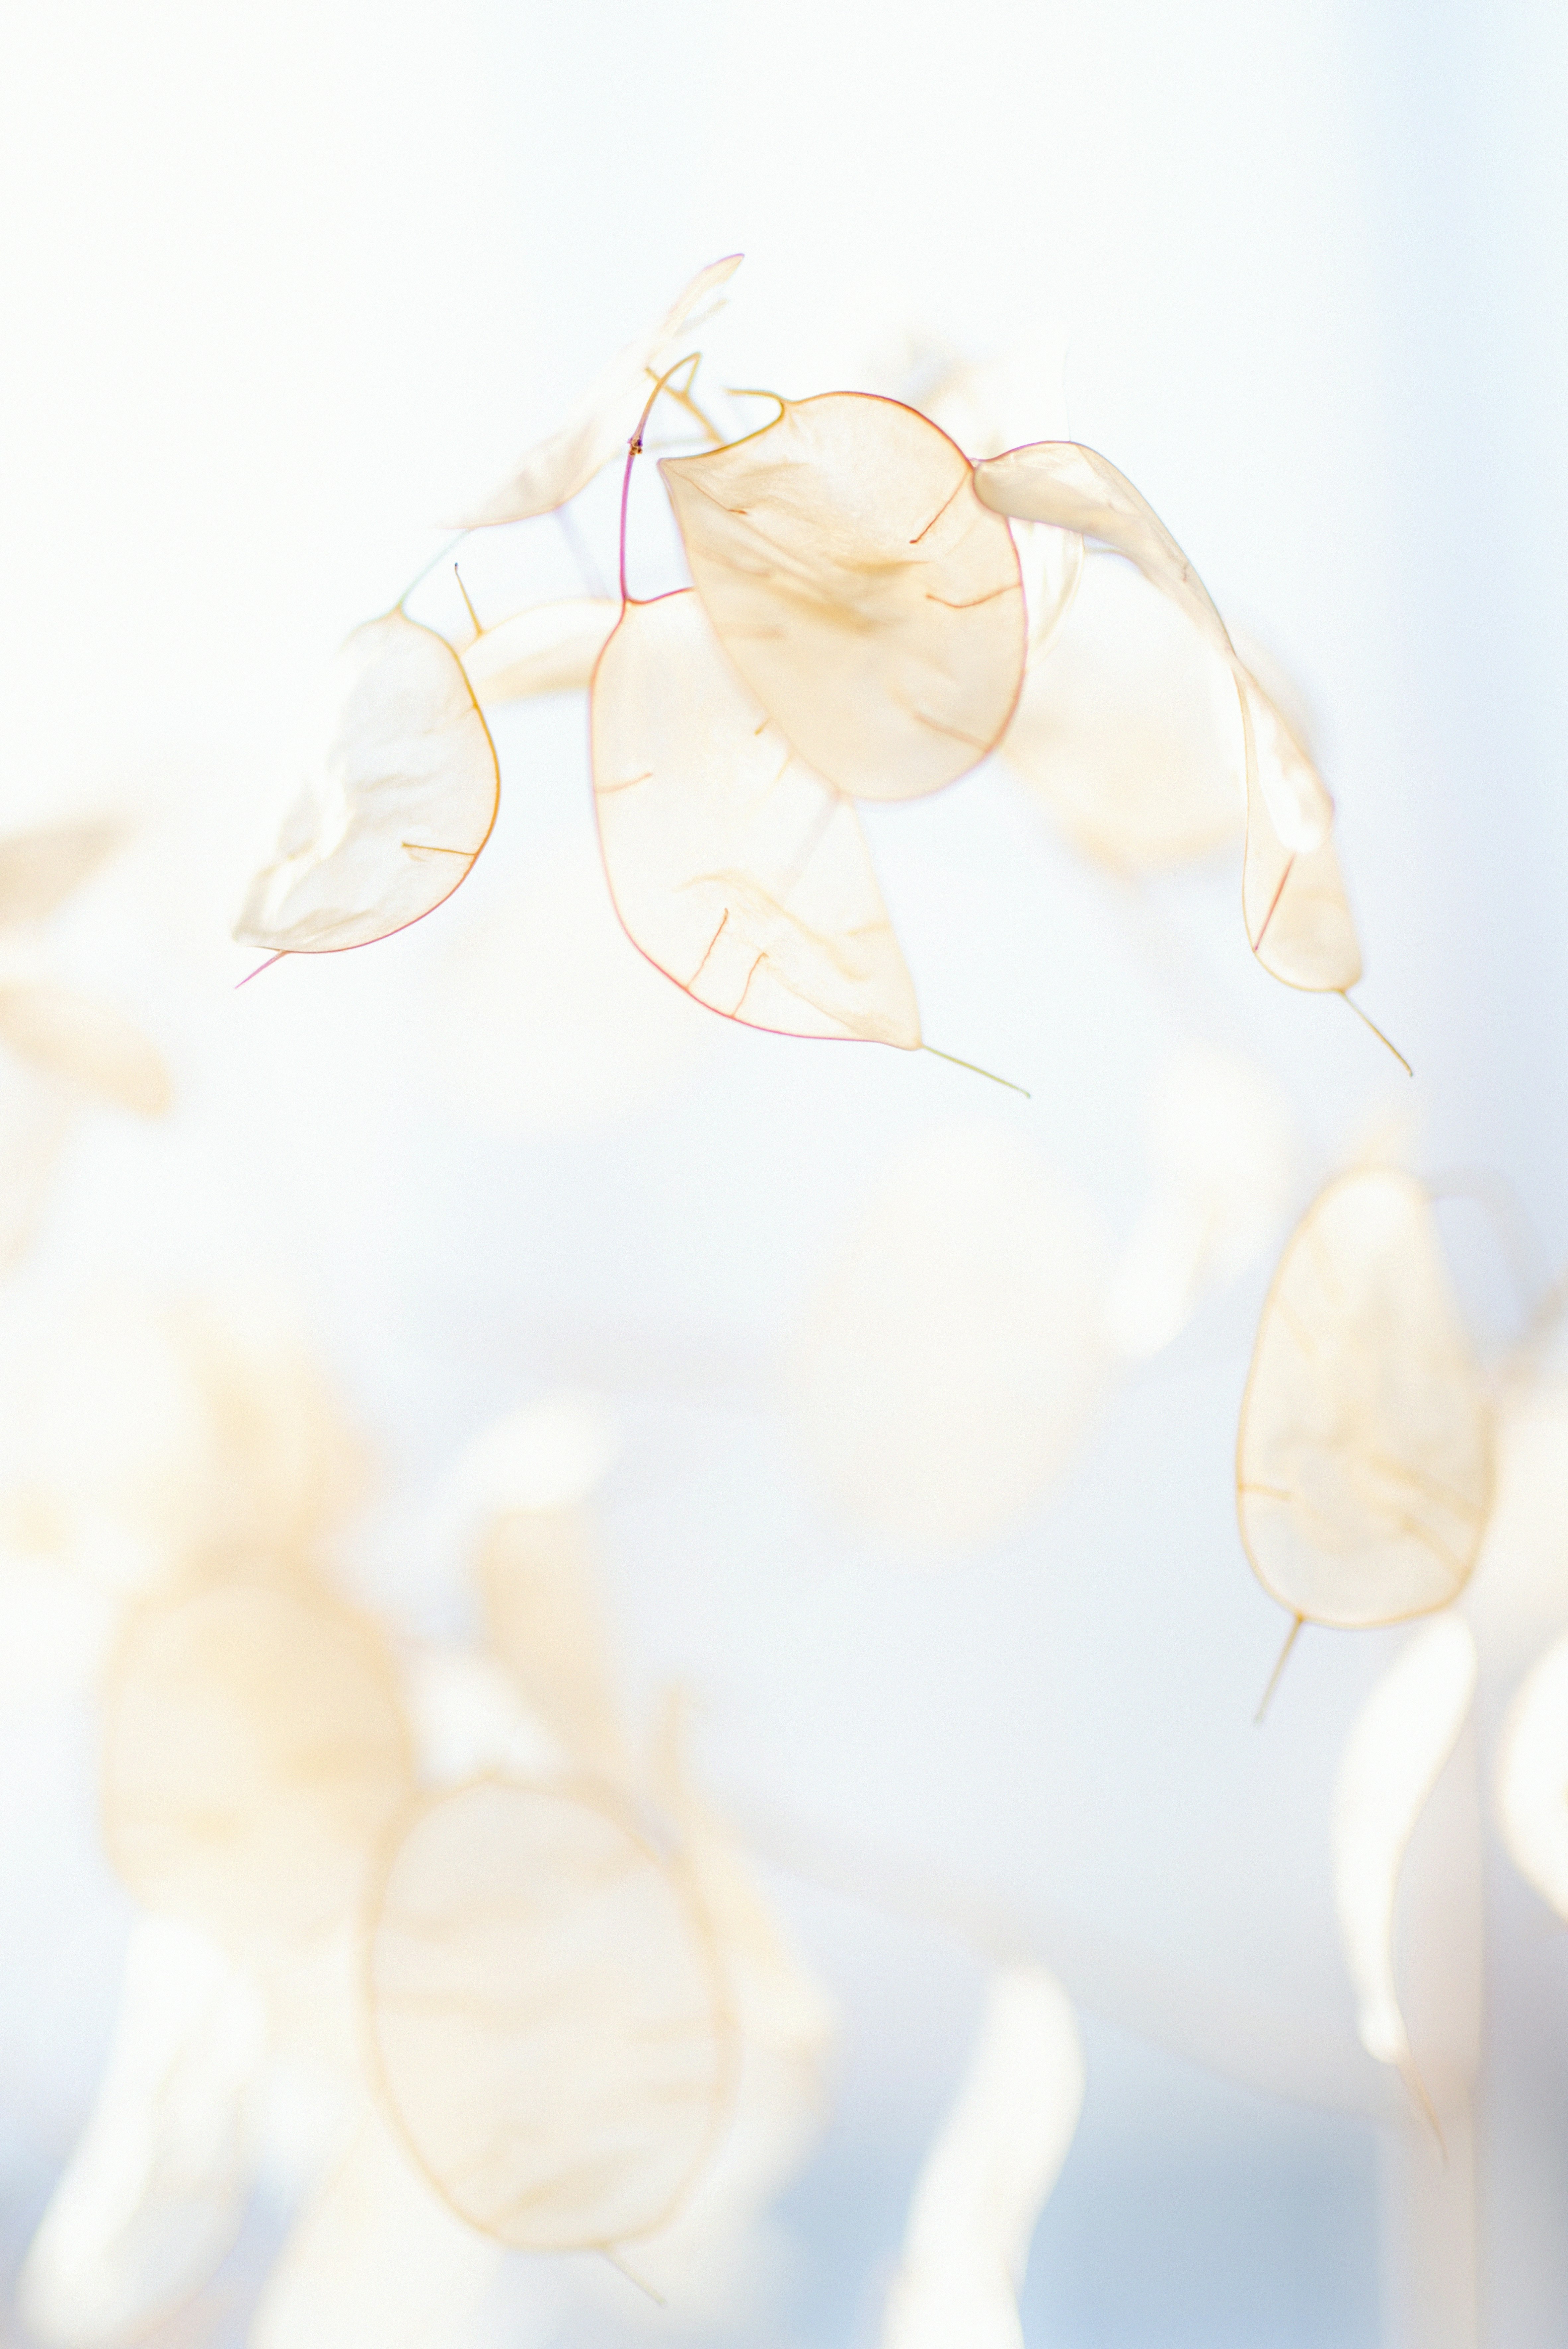 white and brown flower petals